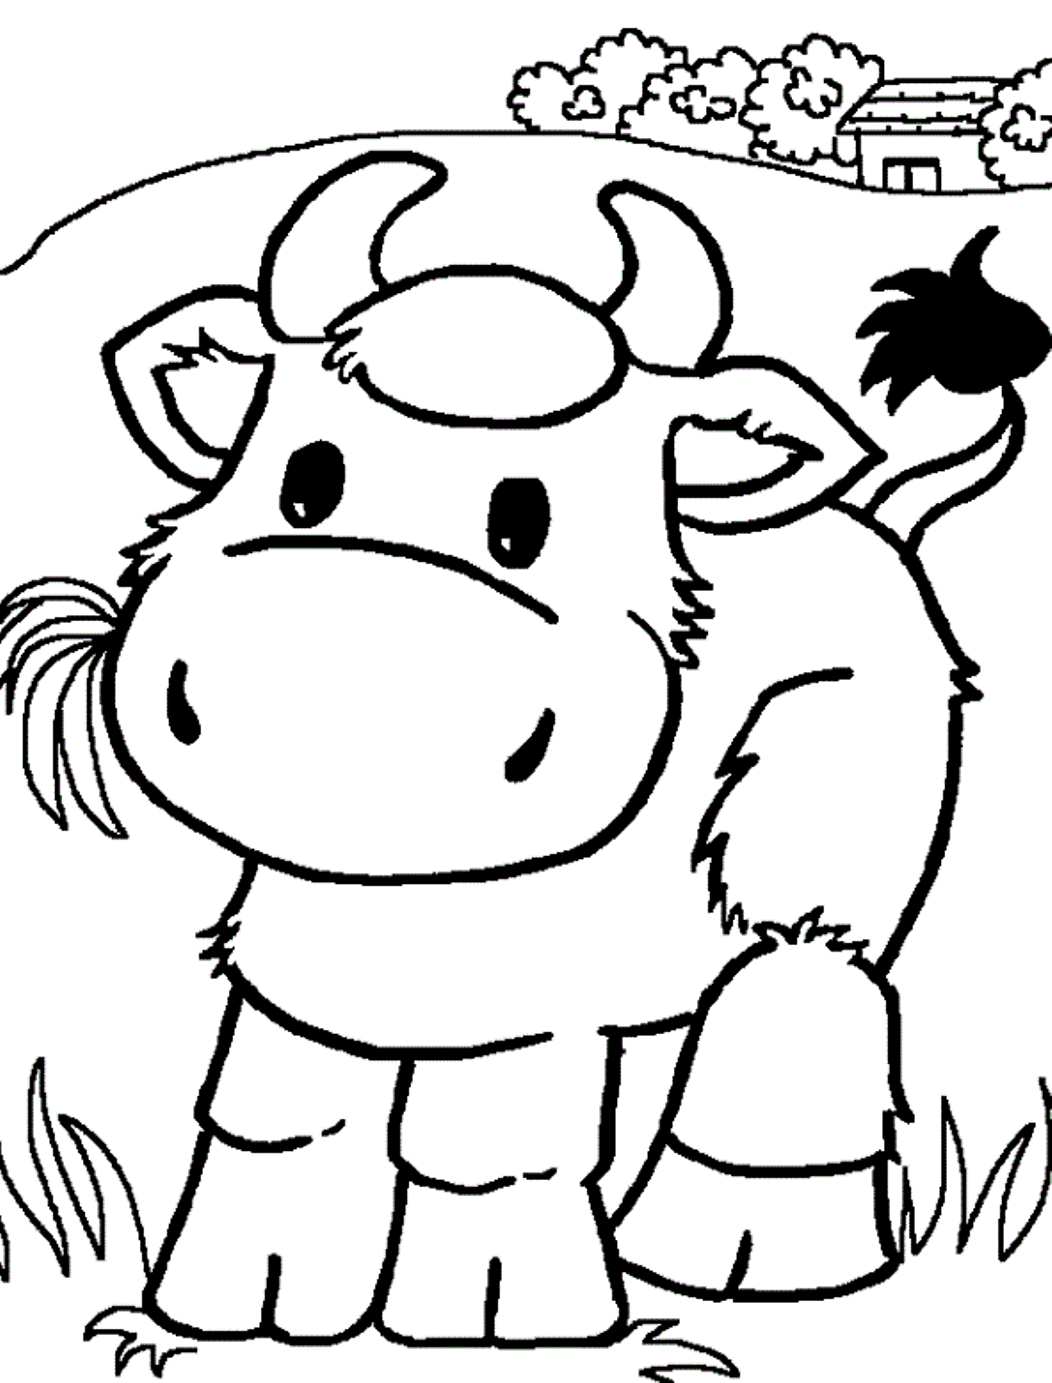 Cake Cow Coloring Pages - Coloring Pages For All Ages